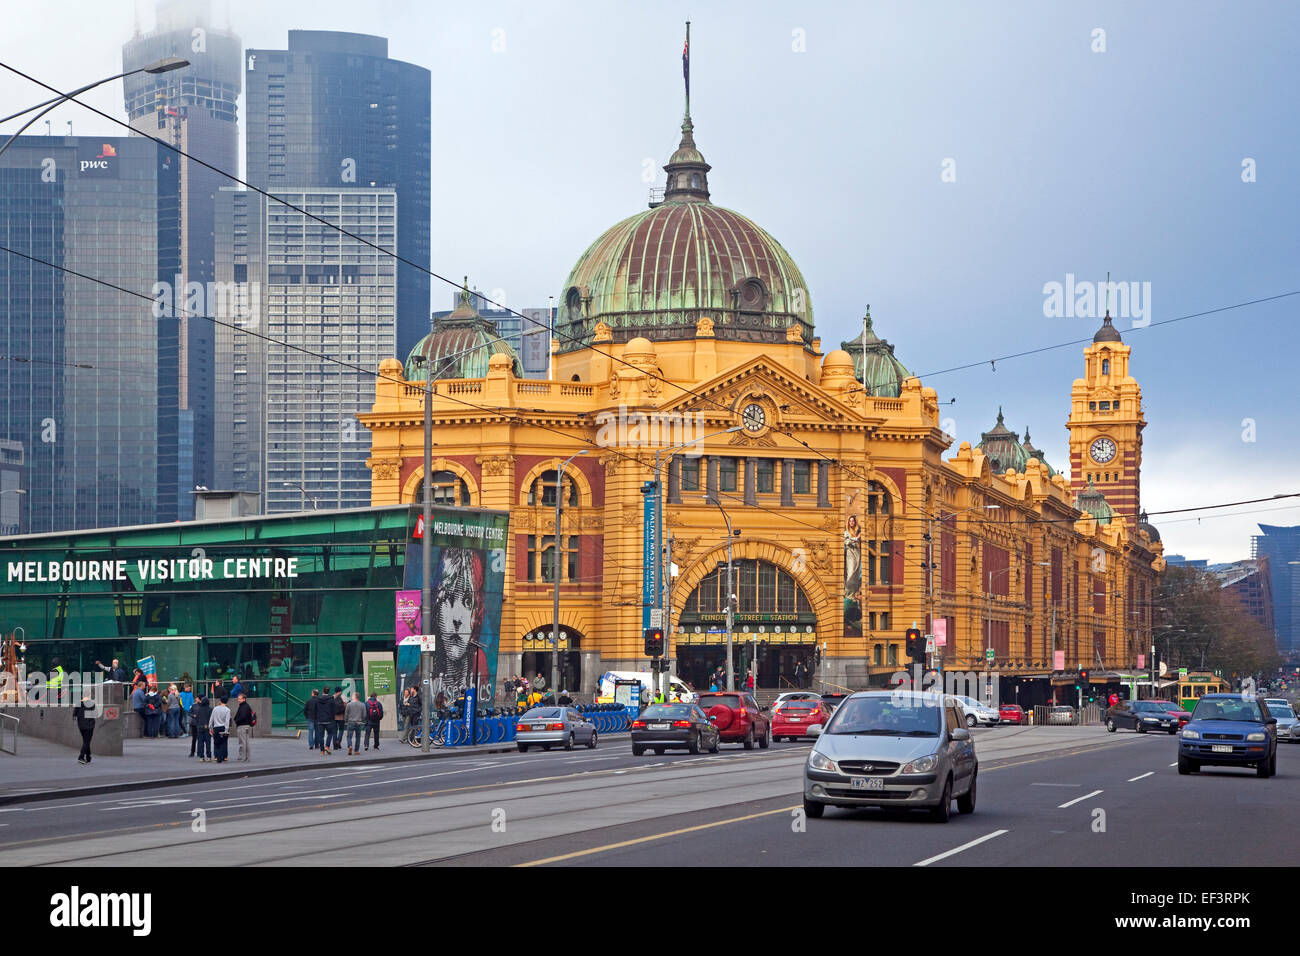 Melbourne visitor centre and Flinders Street railway station, Victoria, Australia Stock Photo